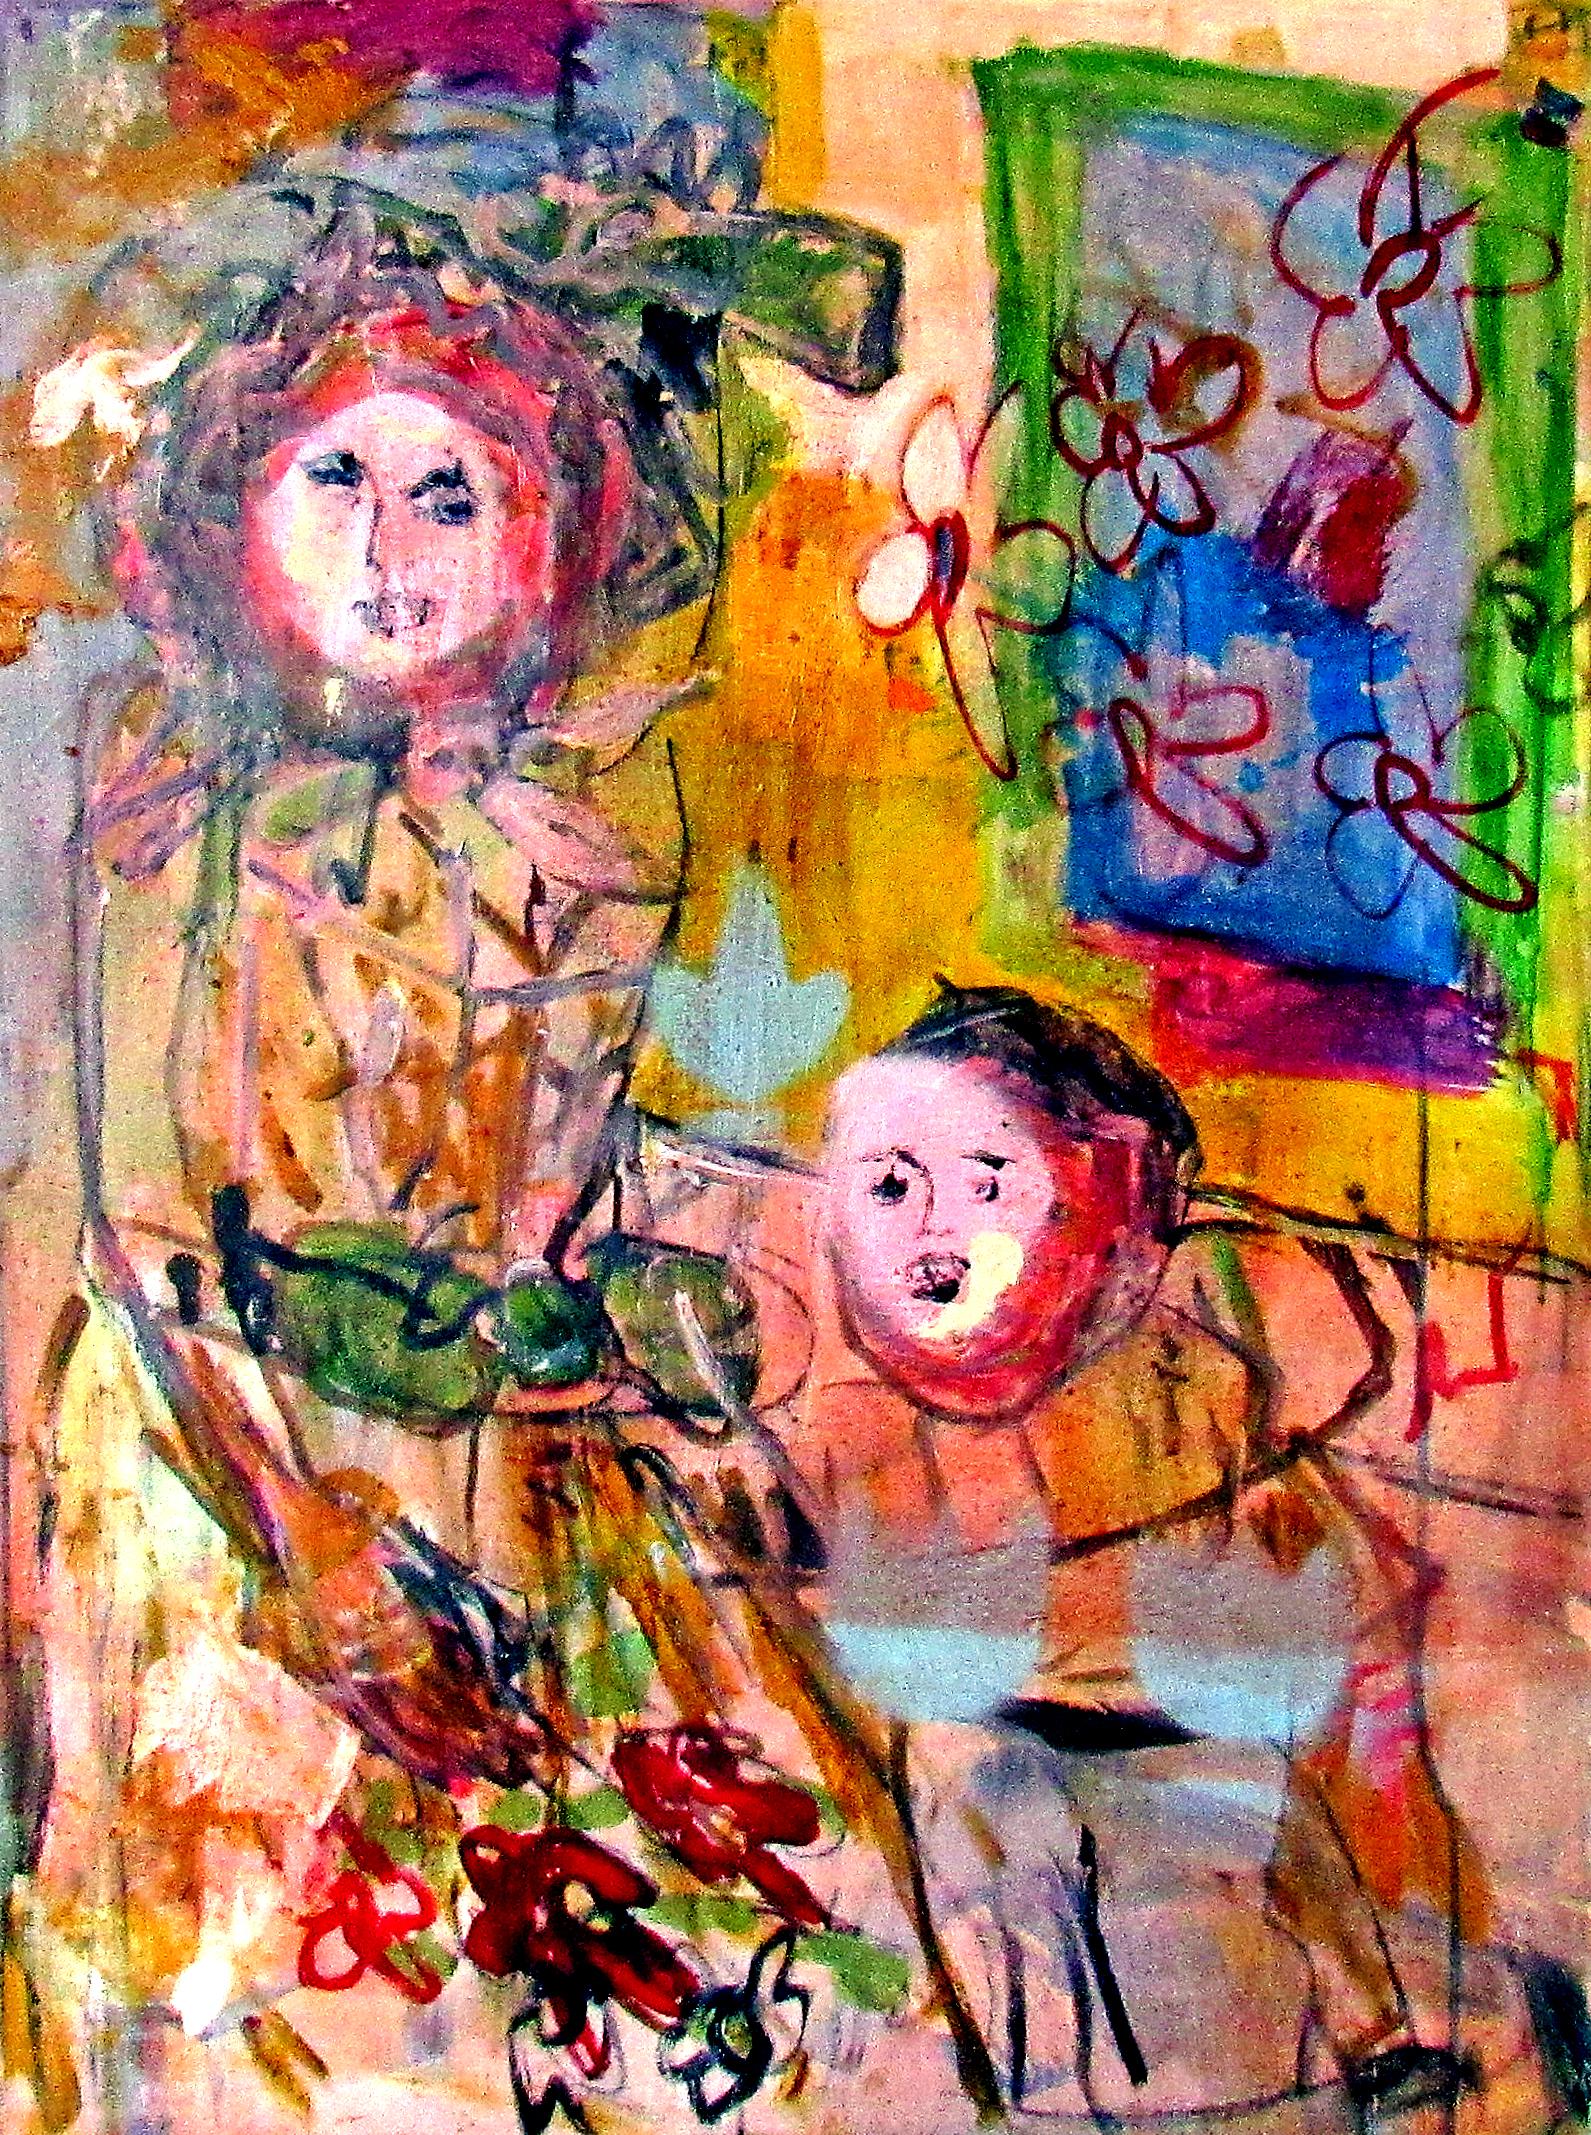 Rosemarie & Young Jim, bright colors abstracted portrait interior flowers